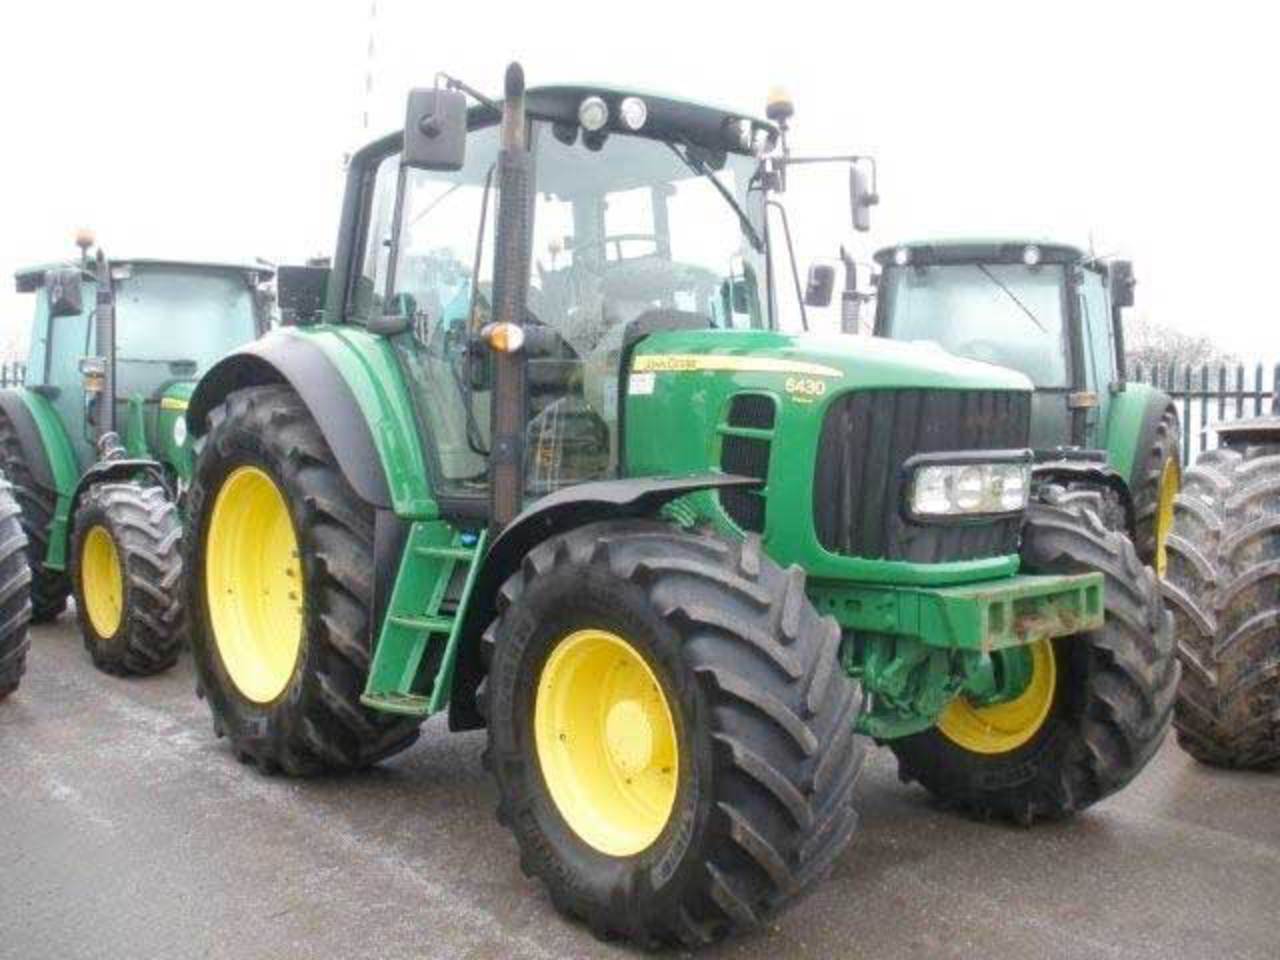 John Deere - 6430 : For Sale - Tractors, Utility Vehicles and ...